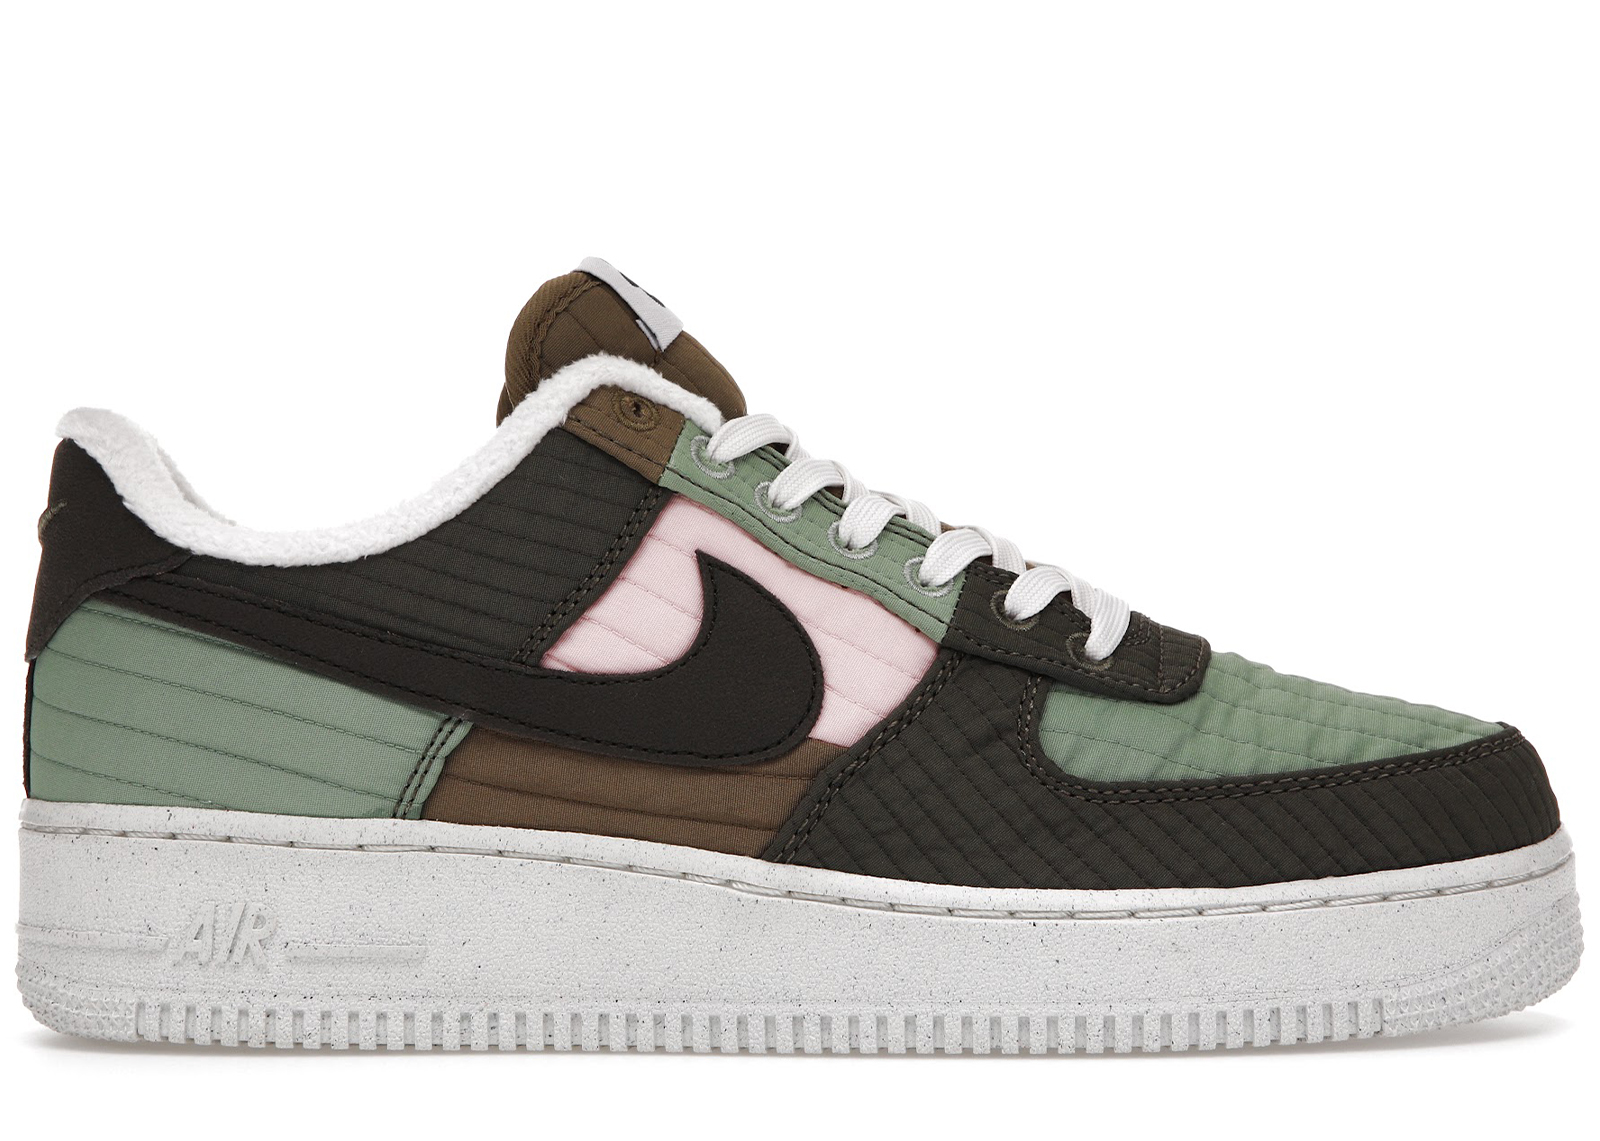 Nike Air Force 1 '07 LX Low Toasty Oil Green Men's - DC8744-300 - US